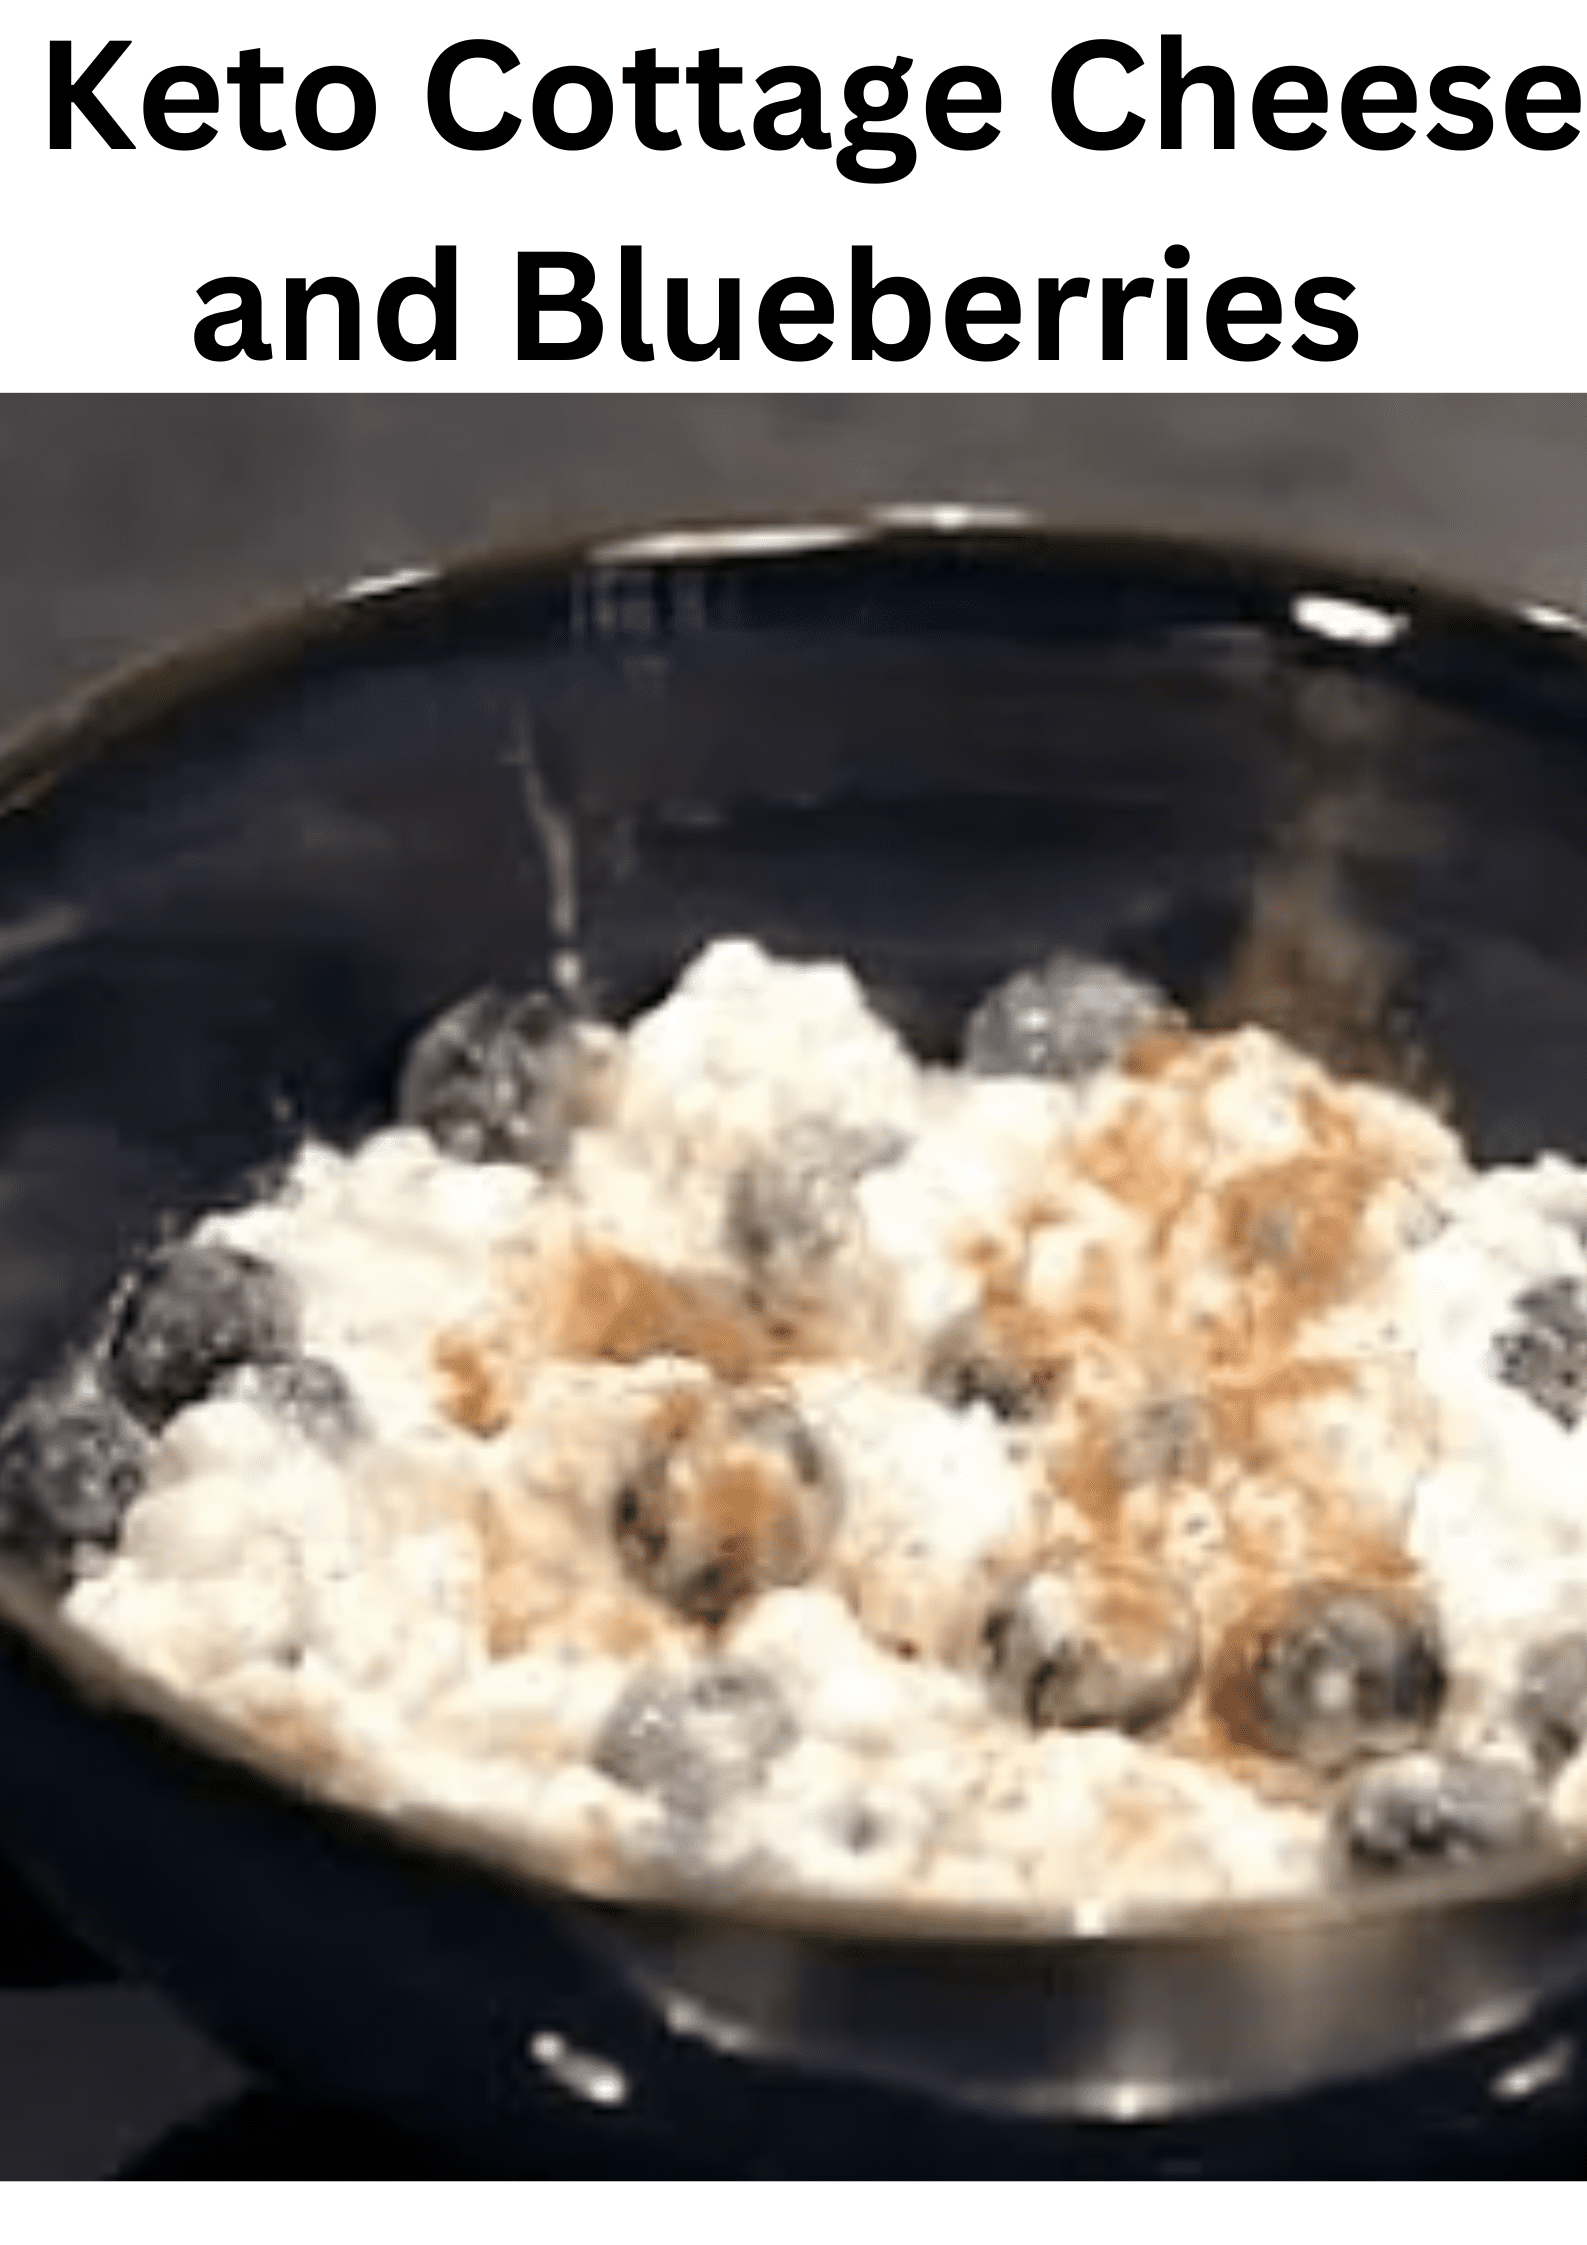 Keto Cottage Cheese and Blueberries